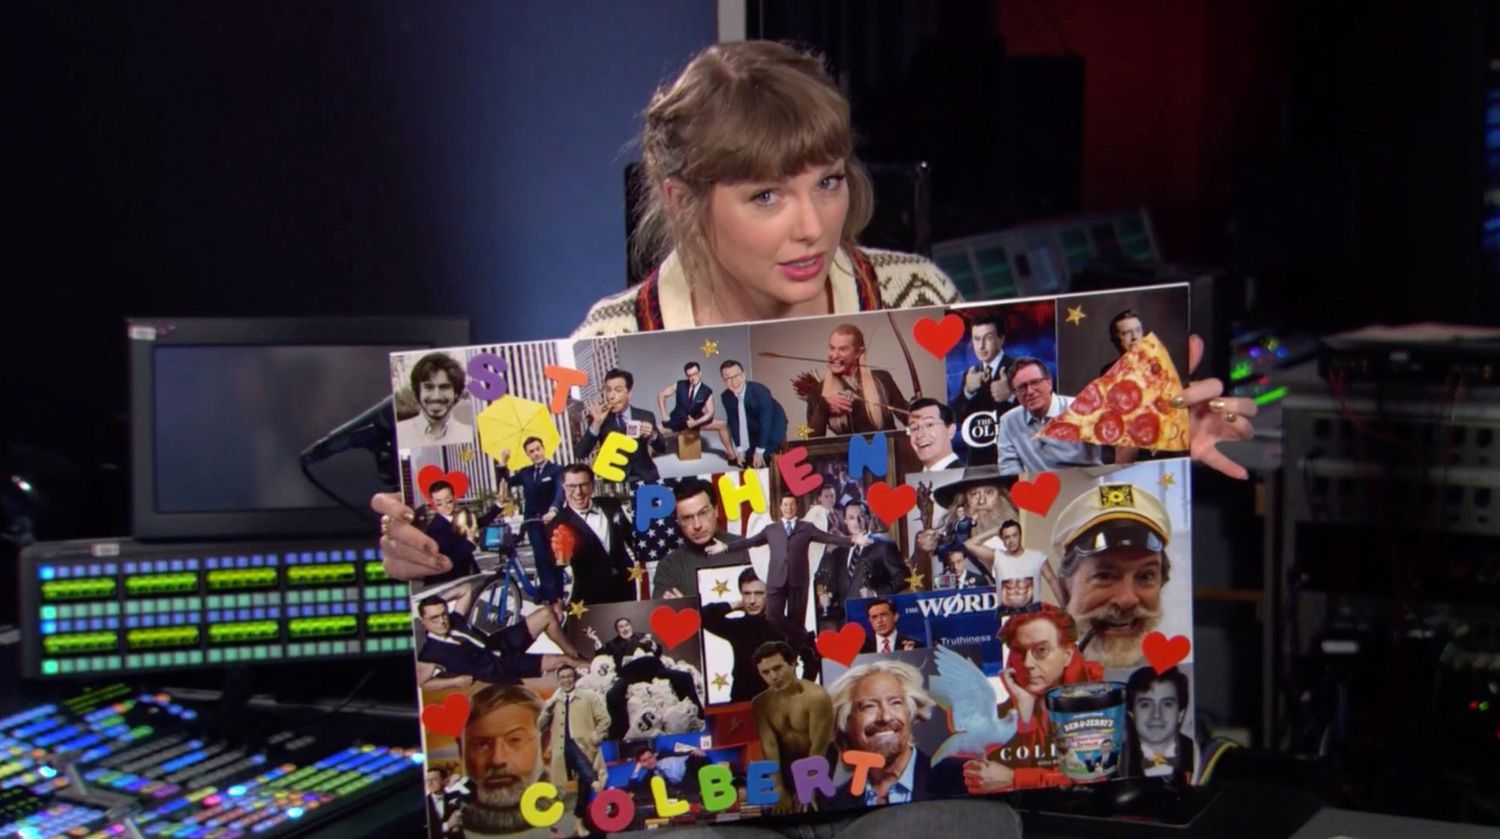 Taylor Swift's Mood Board Proves "Hey Stephen" Isn't About Stephen Colbert (Or Does It?)